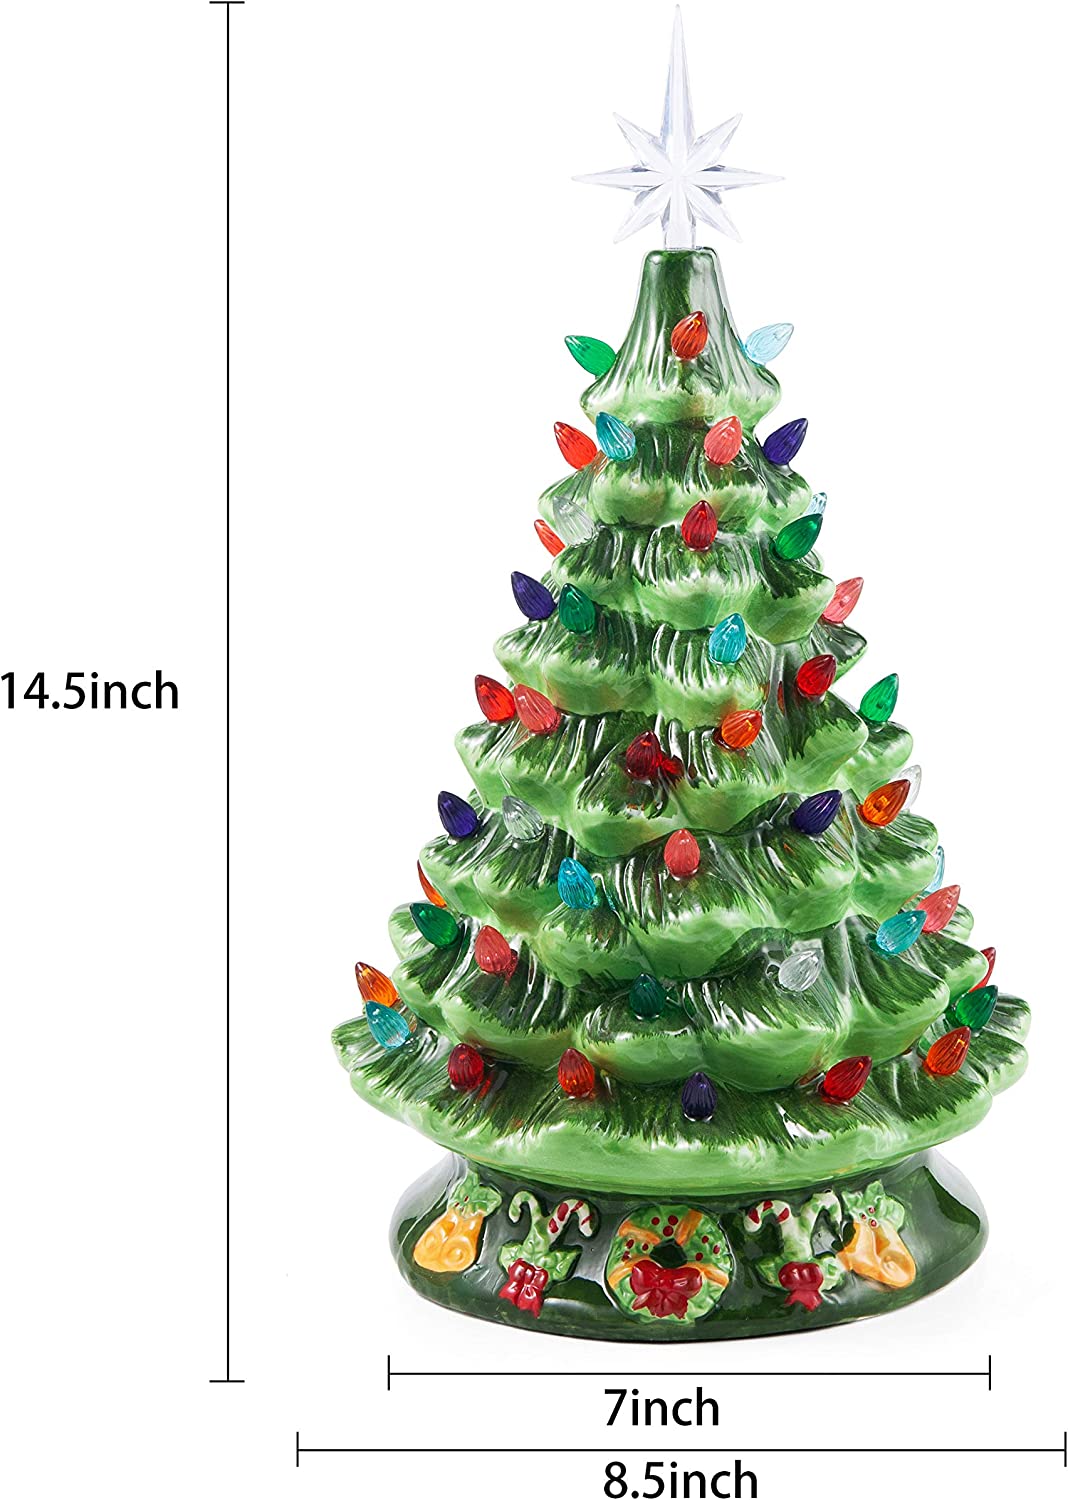 15in Ceramic Christmas Tree with Decorations (Green)